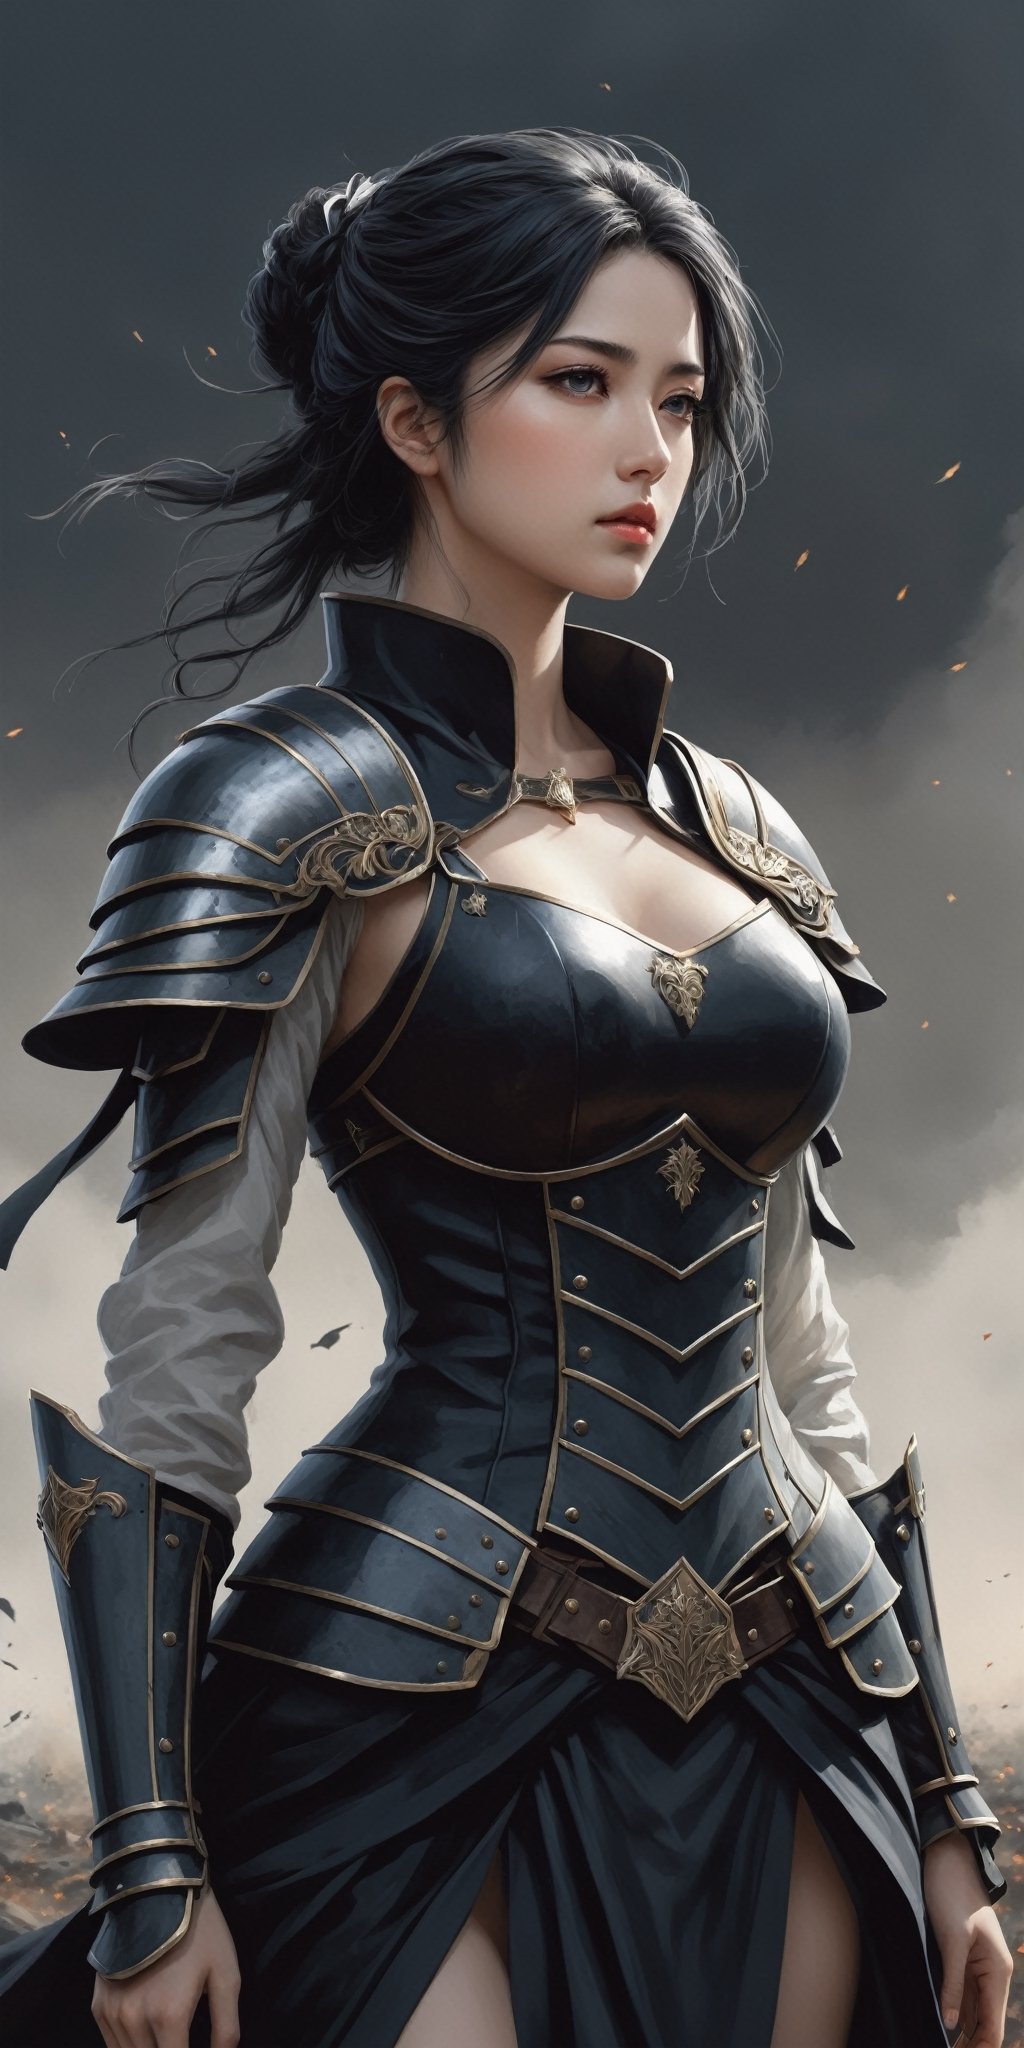 masterpiece, high_res, high quality, 
(side view:1.5), (full length view:1.5), epic fantasy illustration, merge detalization of manga style and realistic drawning of tradtiional arts, flat, dark colors palette, ink drawning, fiction,
incredibly beautiful and attractive woman weared armor, stands with her shoulders slumped, sad and exhausted, (very detailed outfit:1.3). (a woman must convey fragile beauty on whose shoulders lies the fate of the world and this oppresses her). the picture looks like a book cover. Use histories about feamle heroes. 
Surreal battlefield background, fusion cruelty of real war and symbolism of hero eposes, intricate and unexpected detailes. Dark and gothic. 
